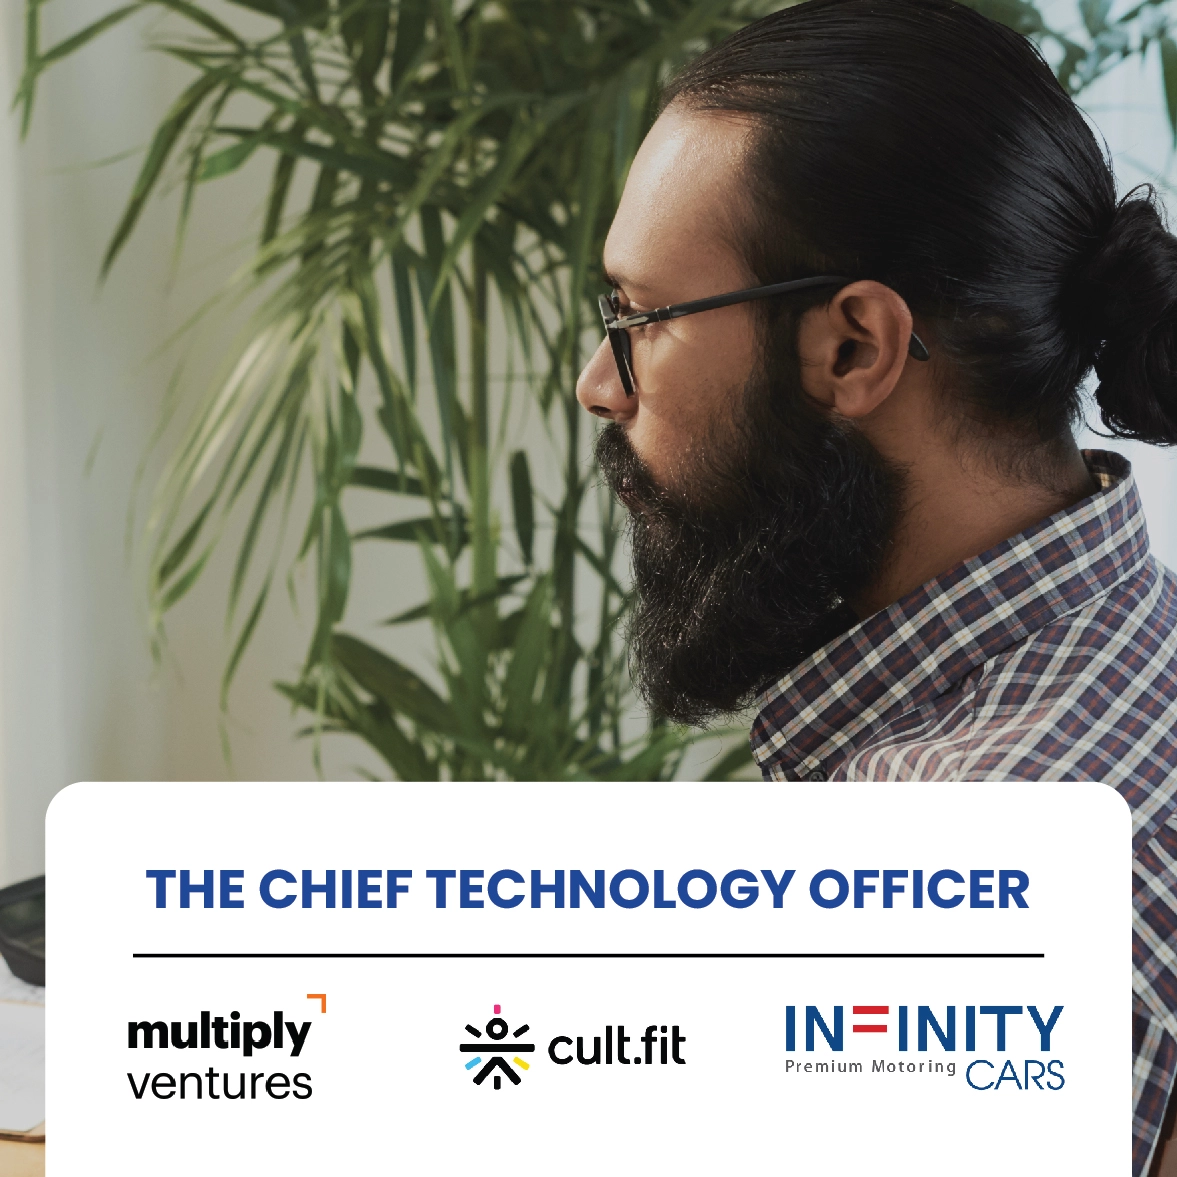 The Chief Technology Officer